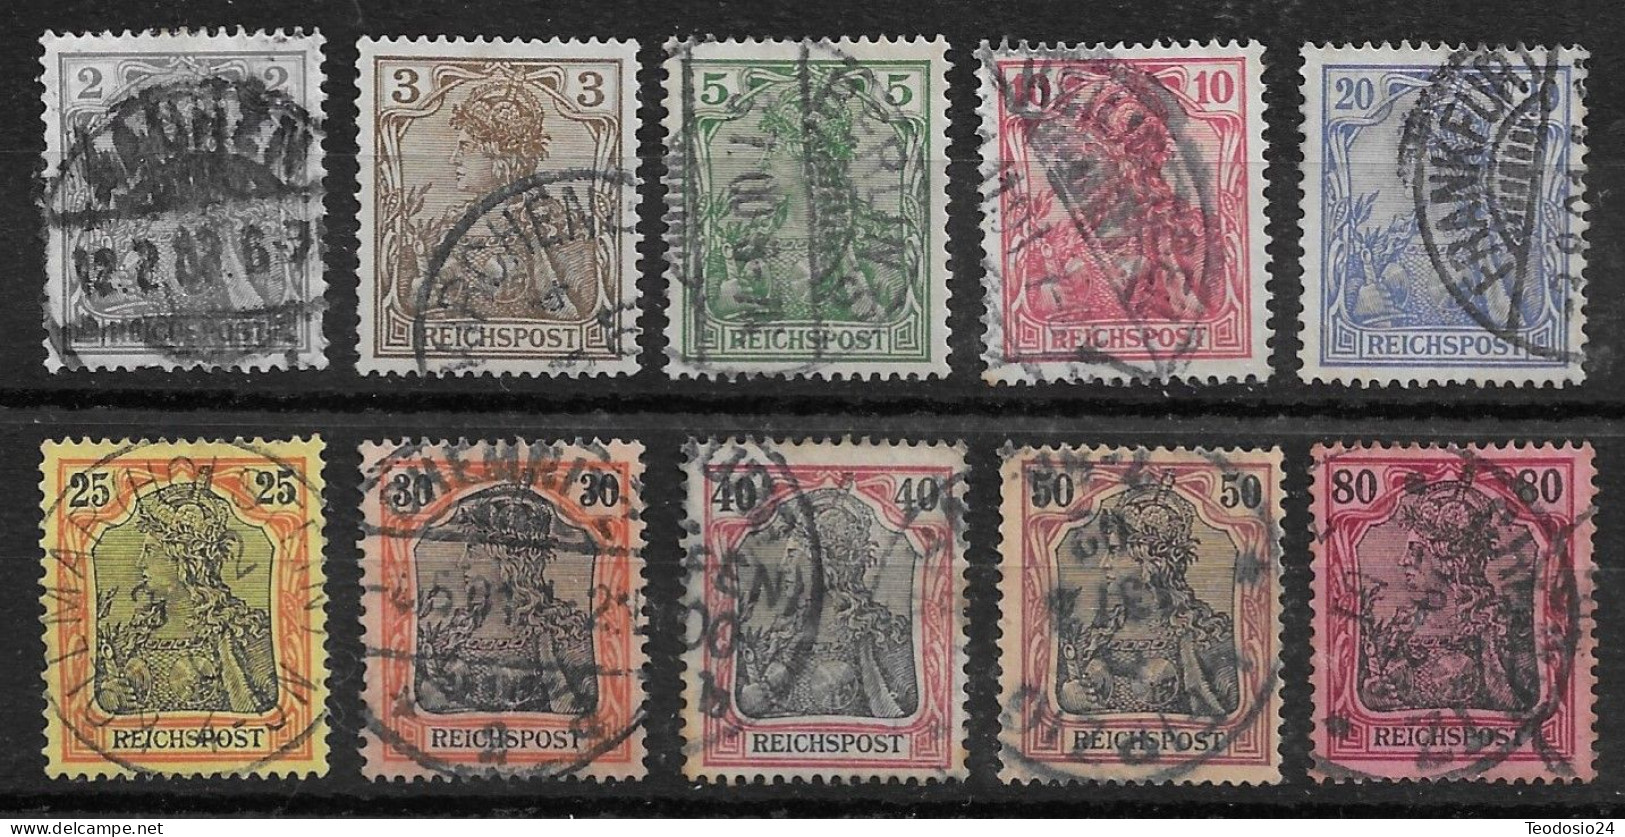 DR IMPERIO  1900  "REICHSPOST"  53 - 62 - Used Stamps